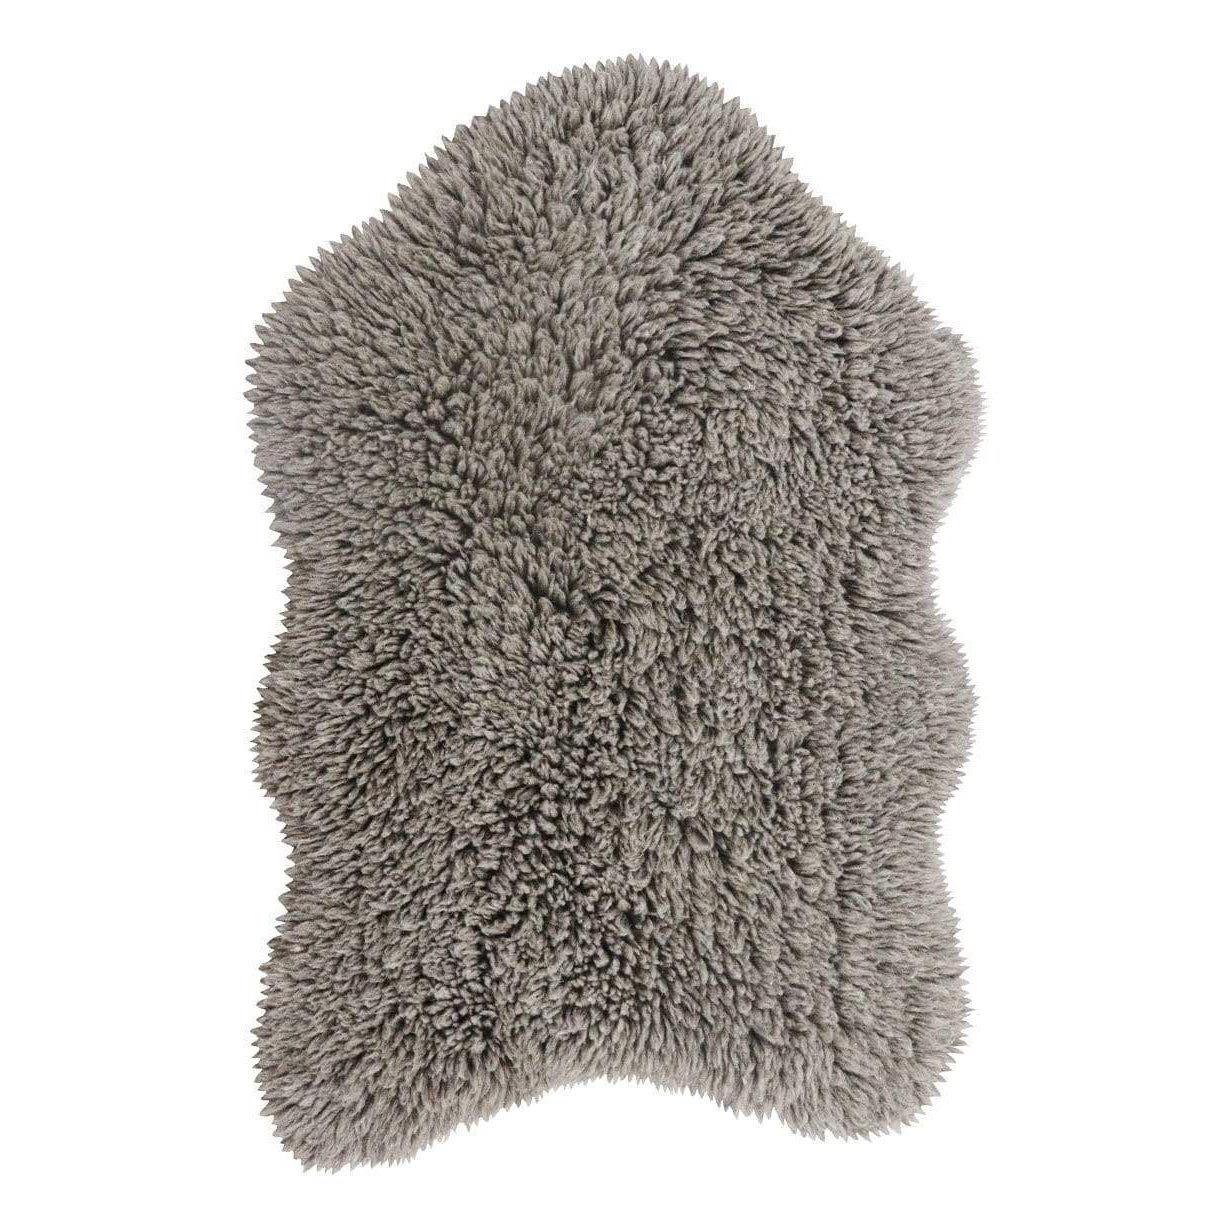 Lorena Canals Woolly Grey Woolable Area Rug